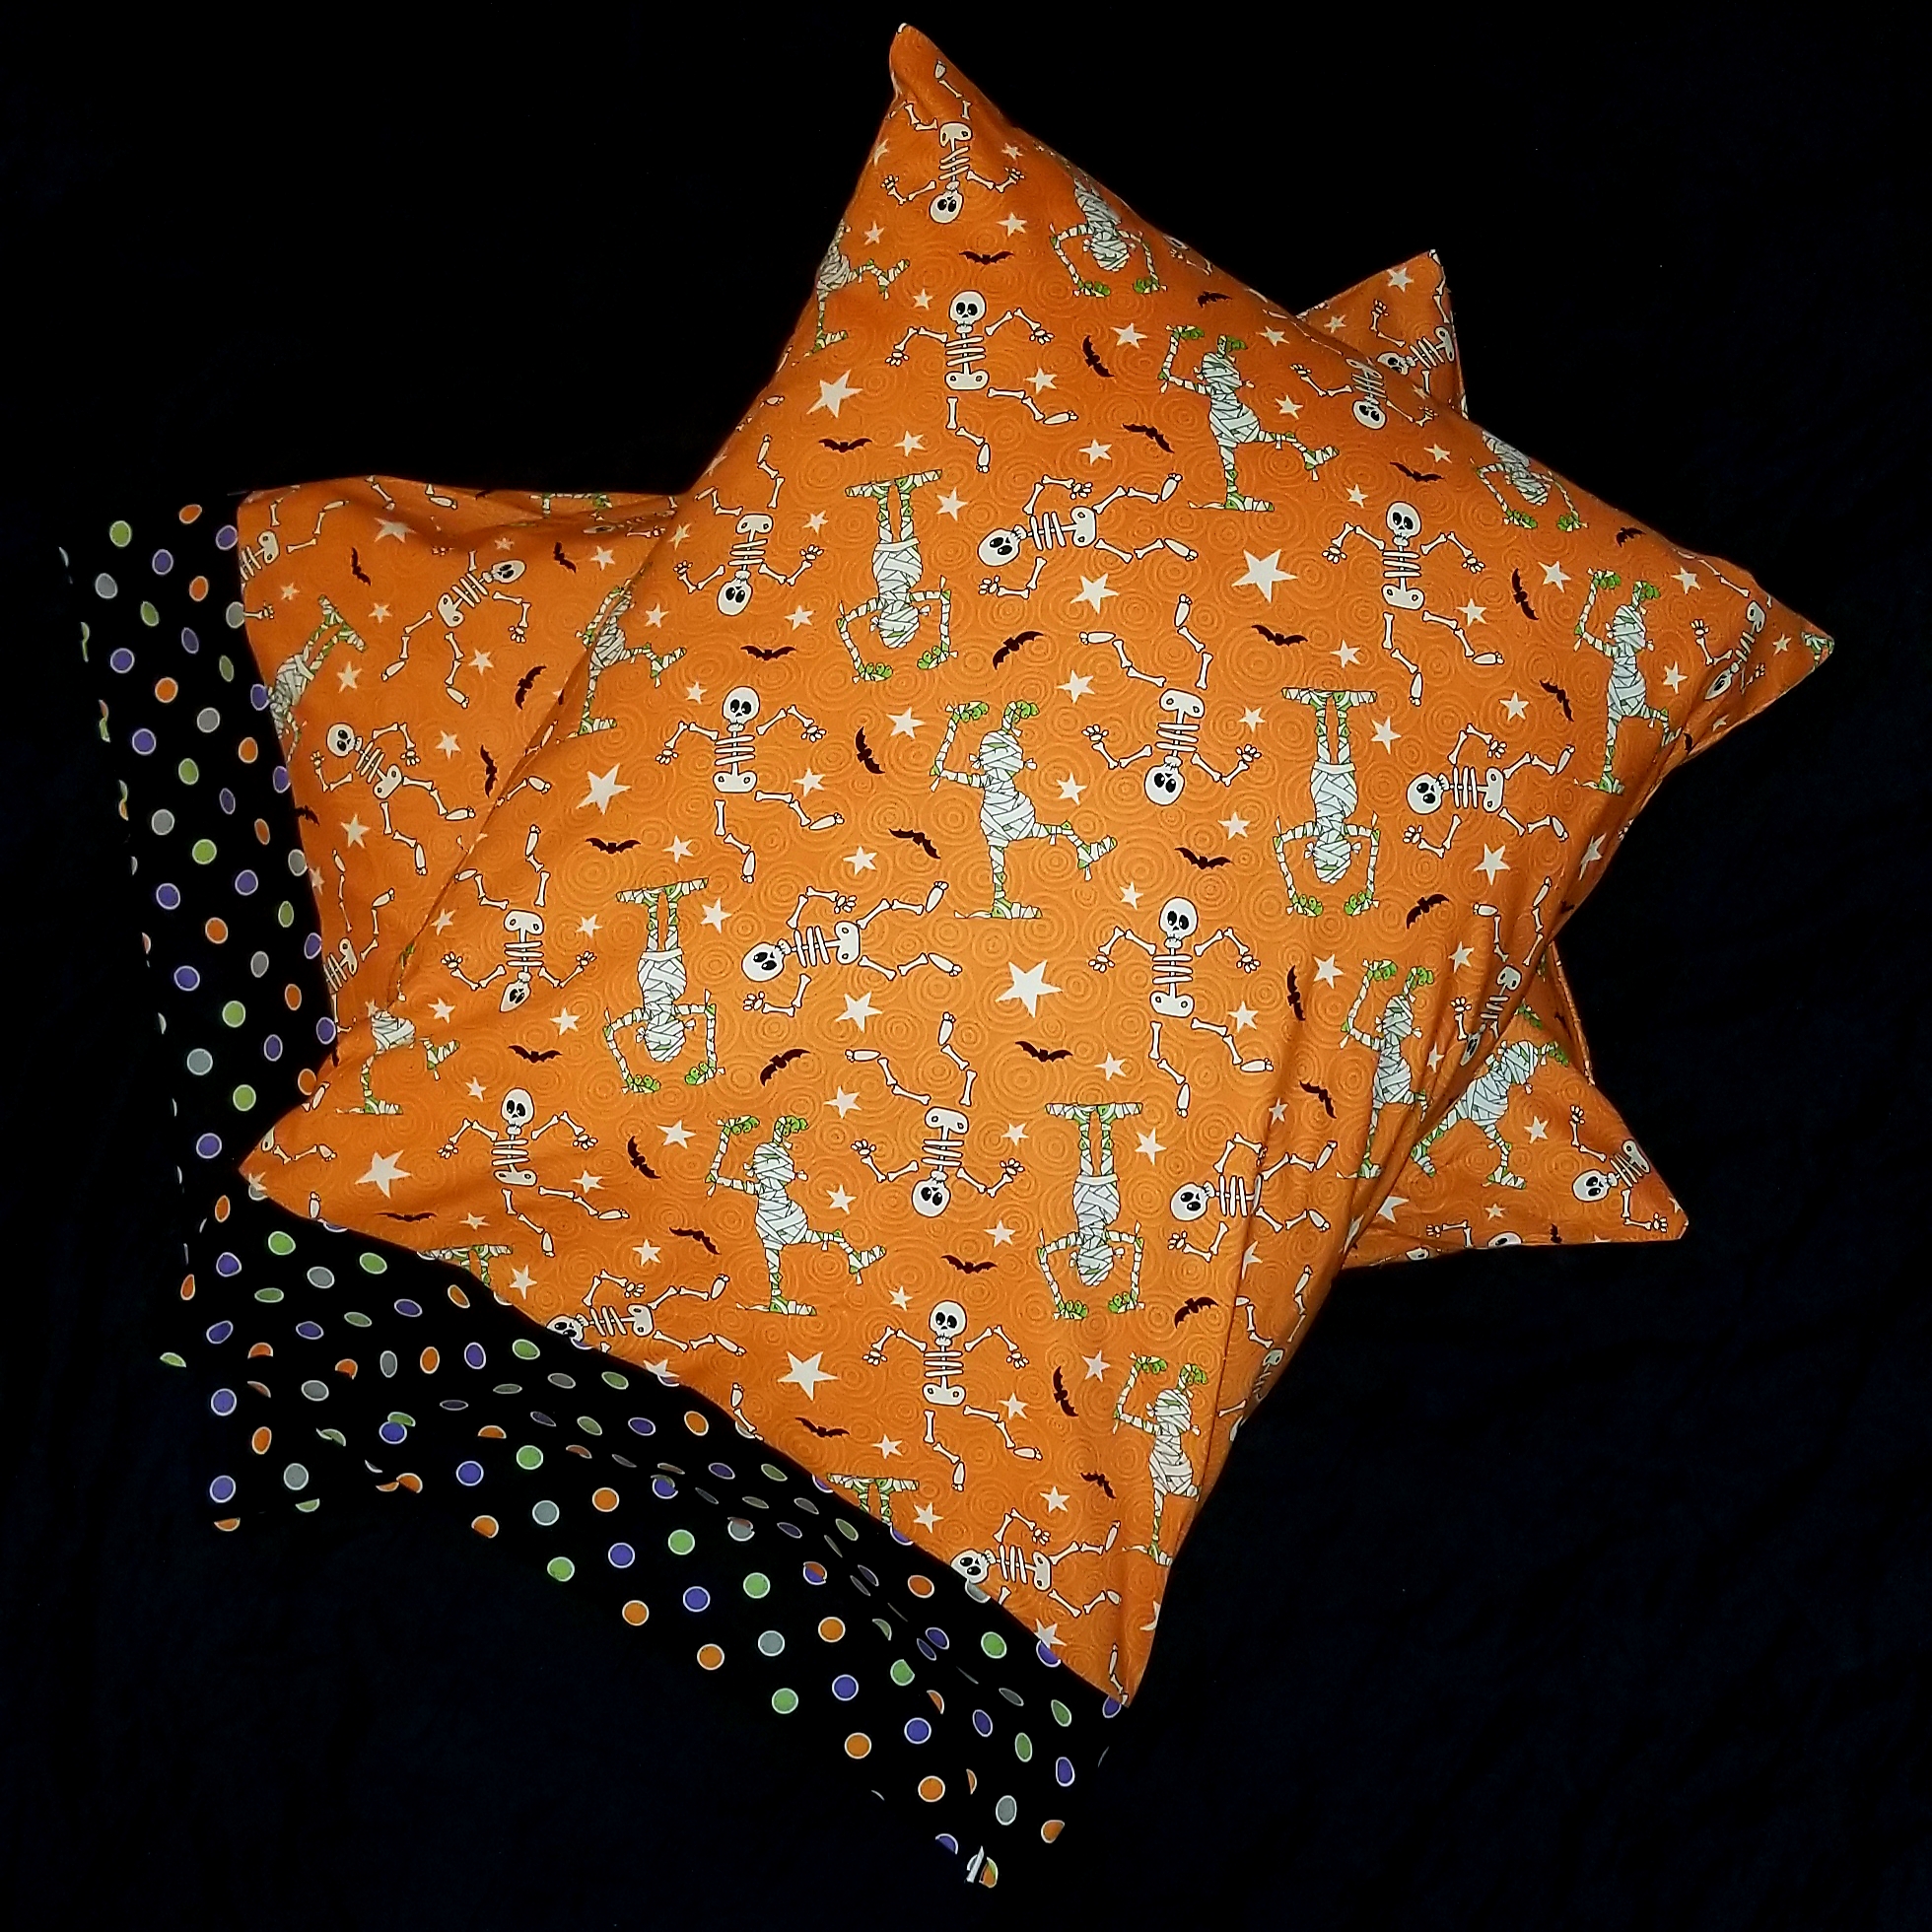 Halloween themed pillowcase with pattern of glow-in-the-dark skeletons and zombies, orange background, border of colorful dots on black